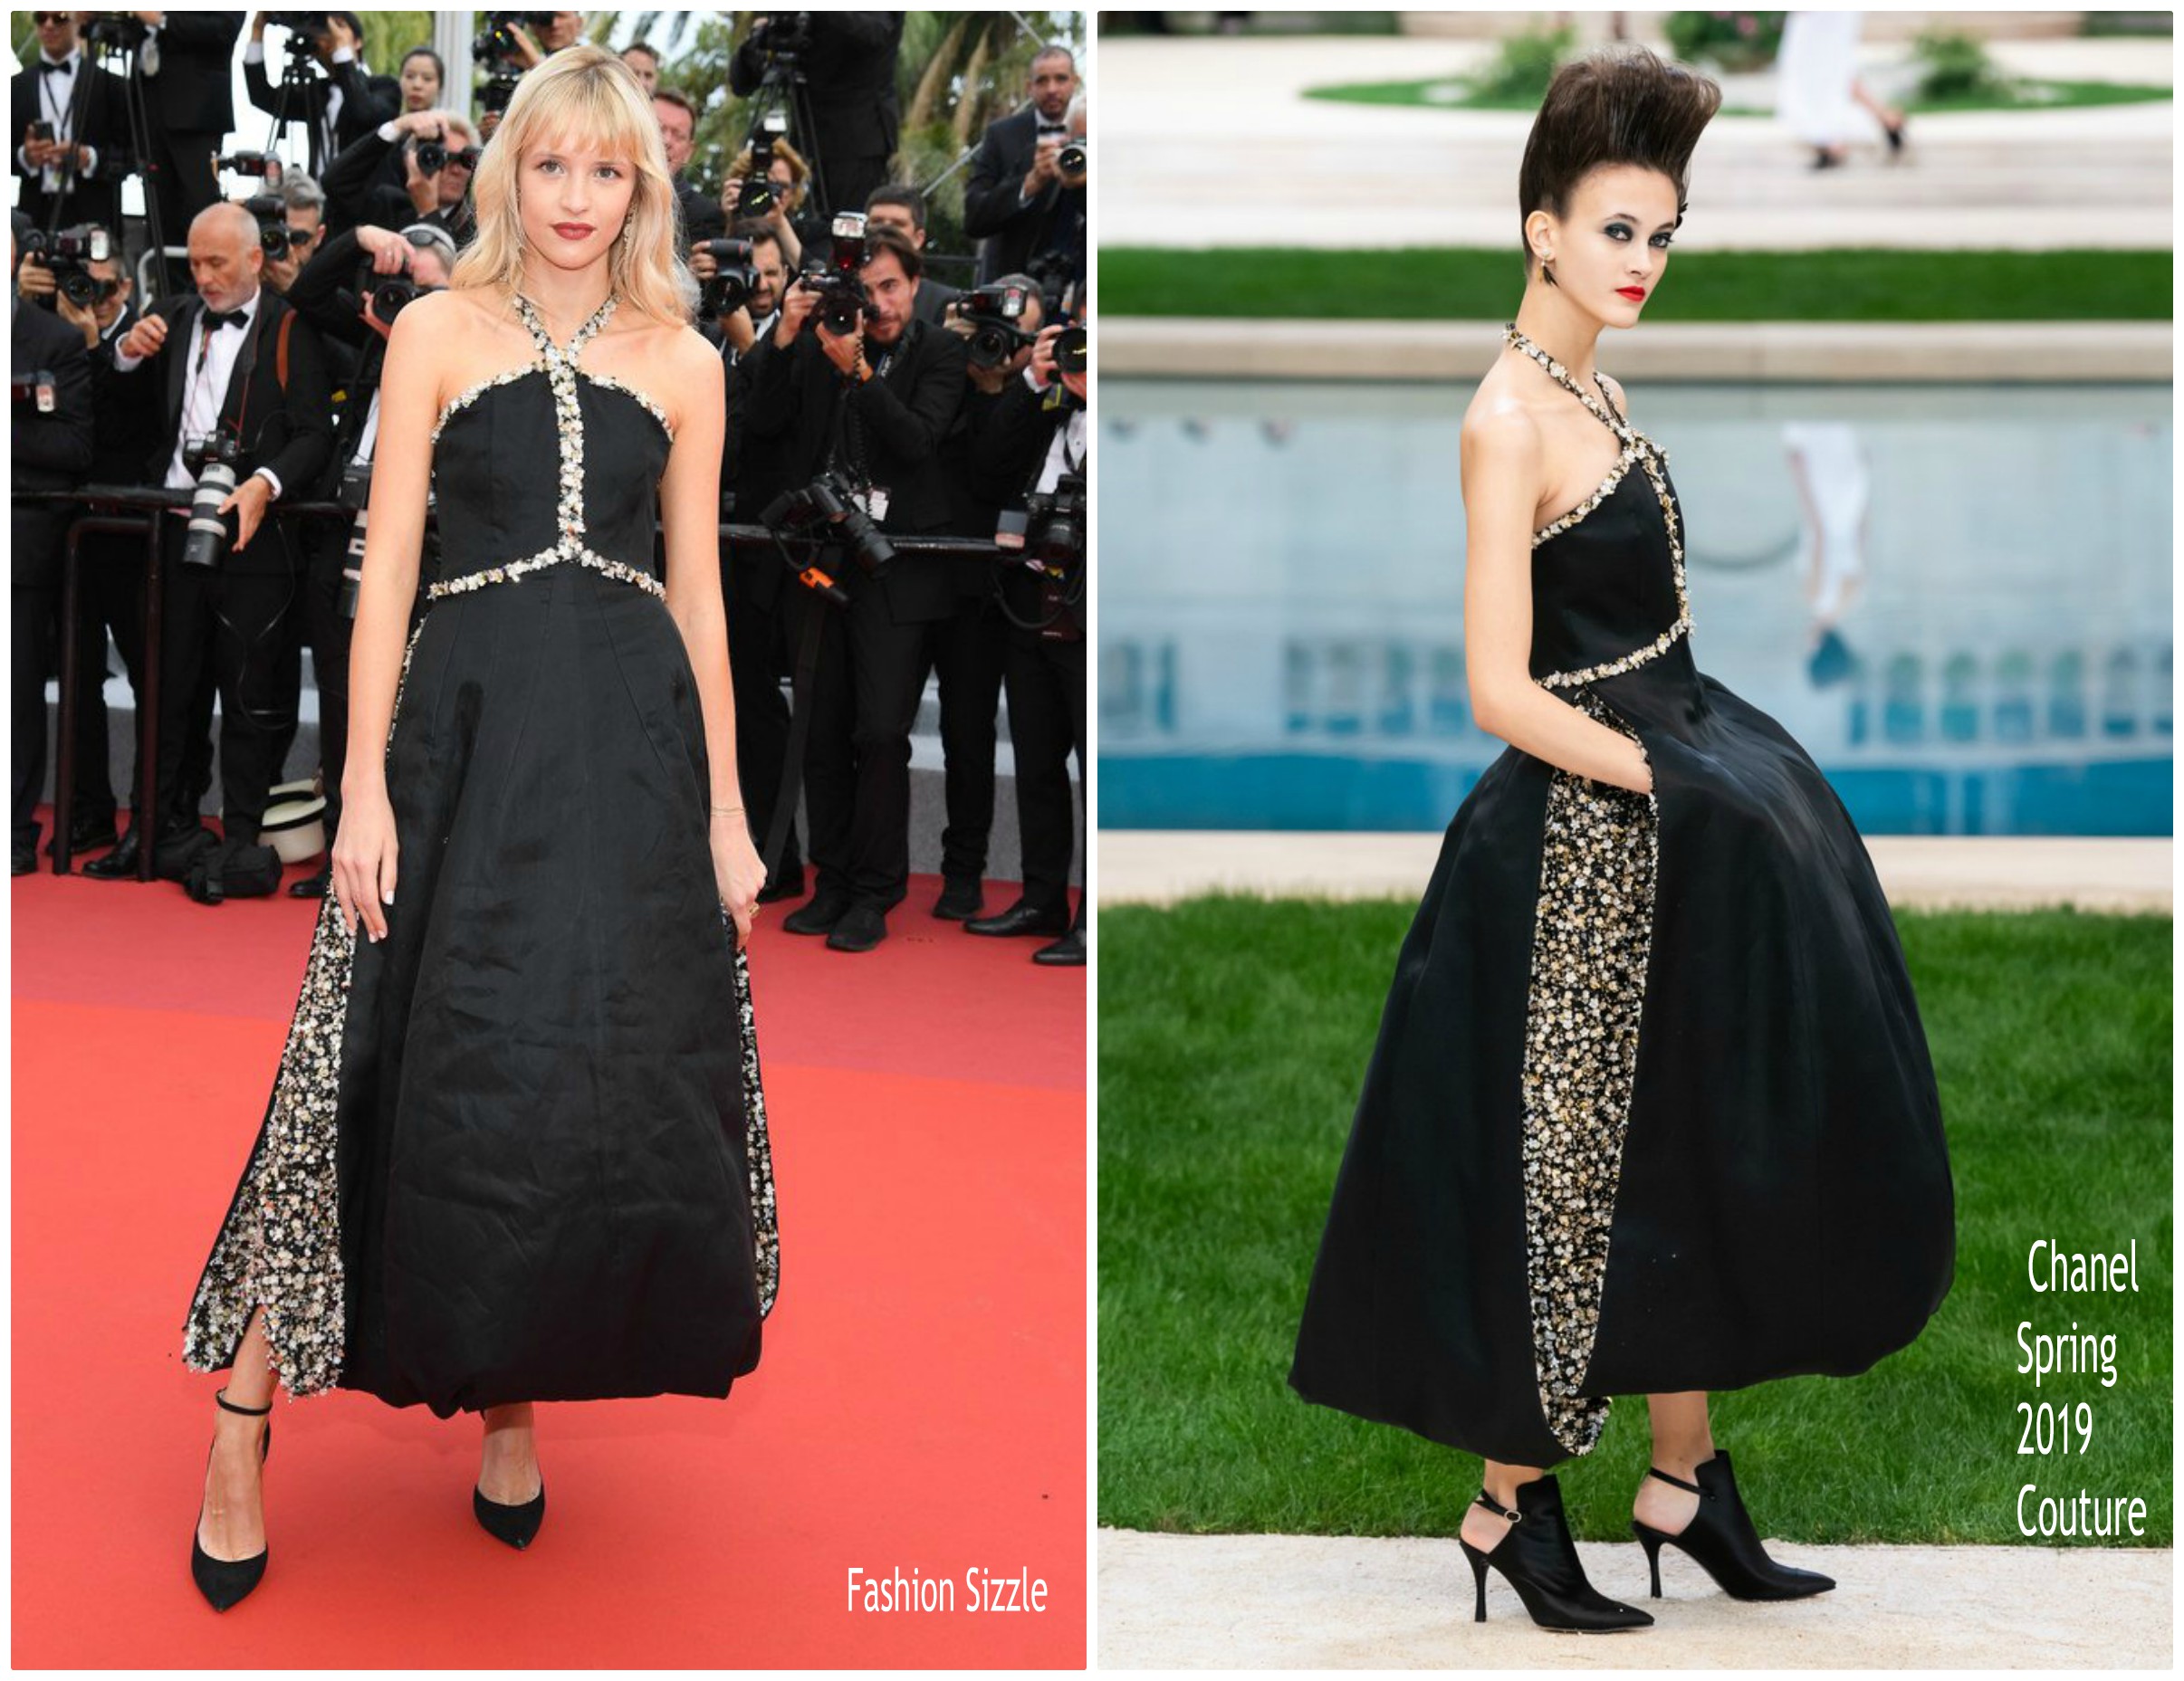 angele-in-chanel-haute-couture-the-dead-dont-die-cannes-film-festival-premiere